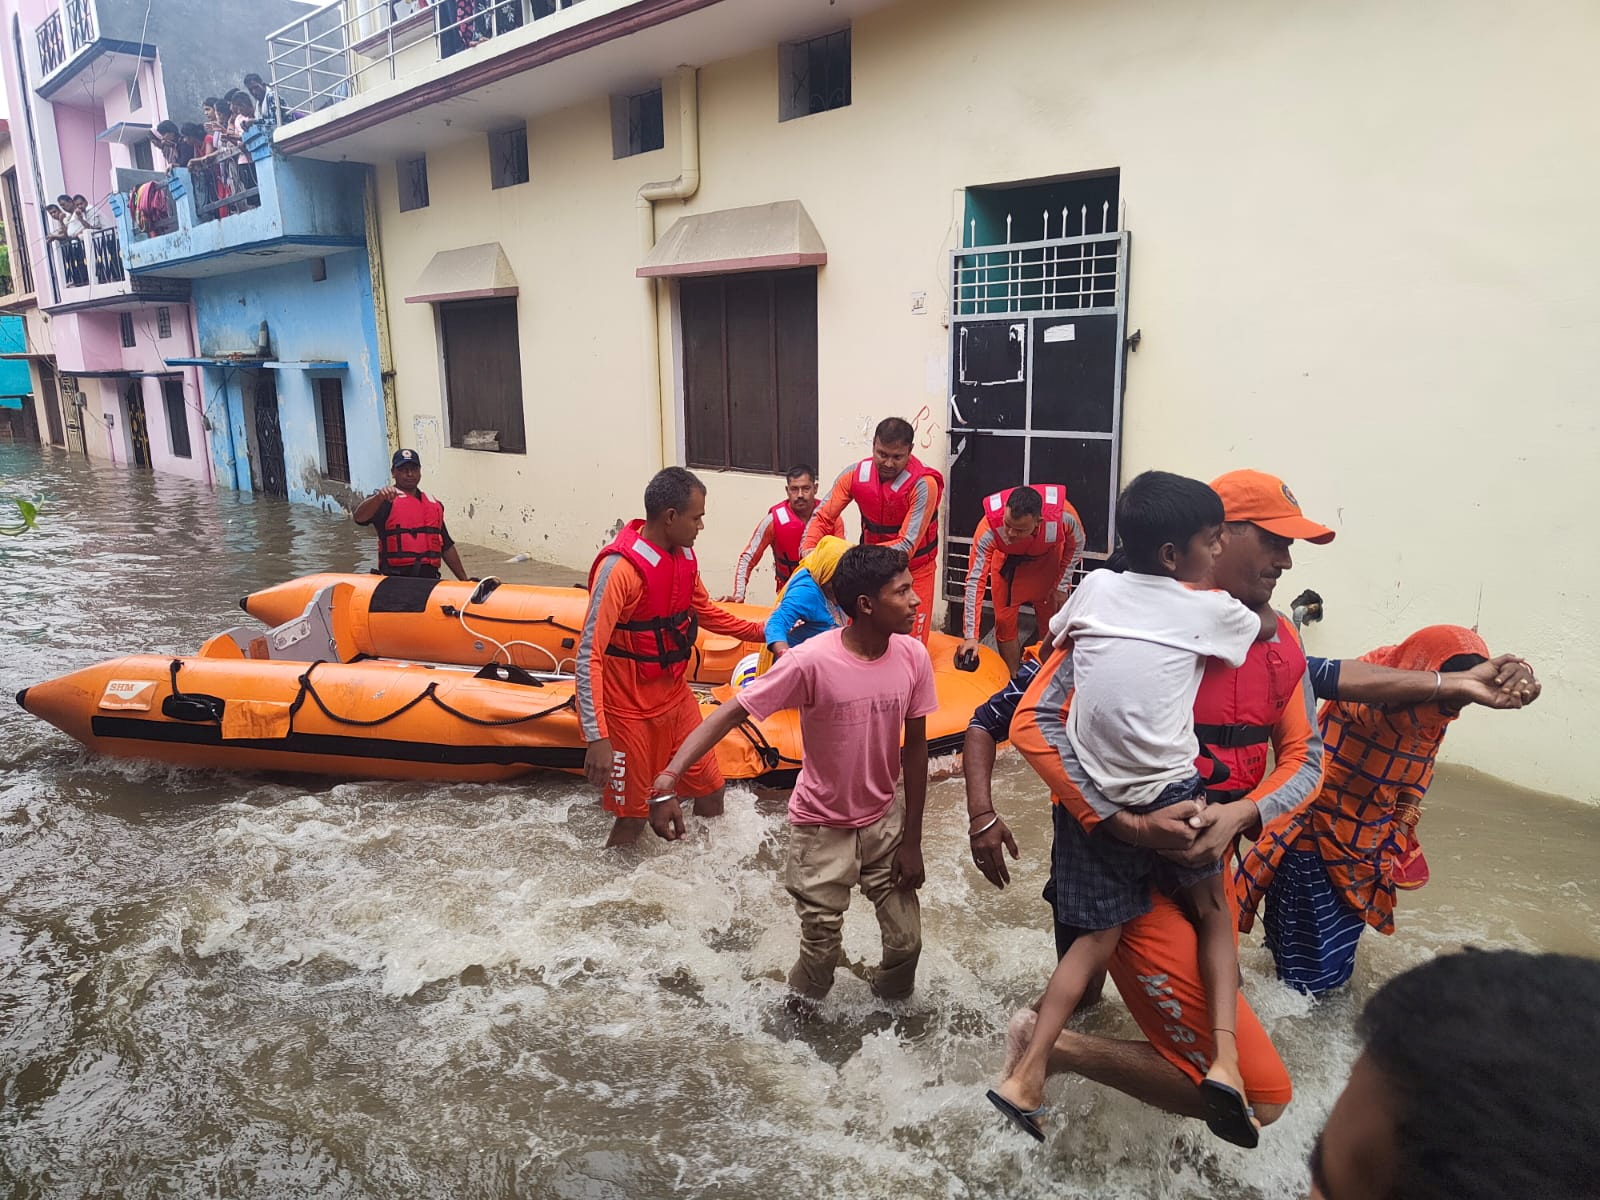 Members of National Disaster Response Force evacuate people to safer places from a flooded area in Udham Singh Nagar